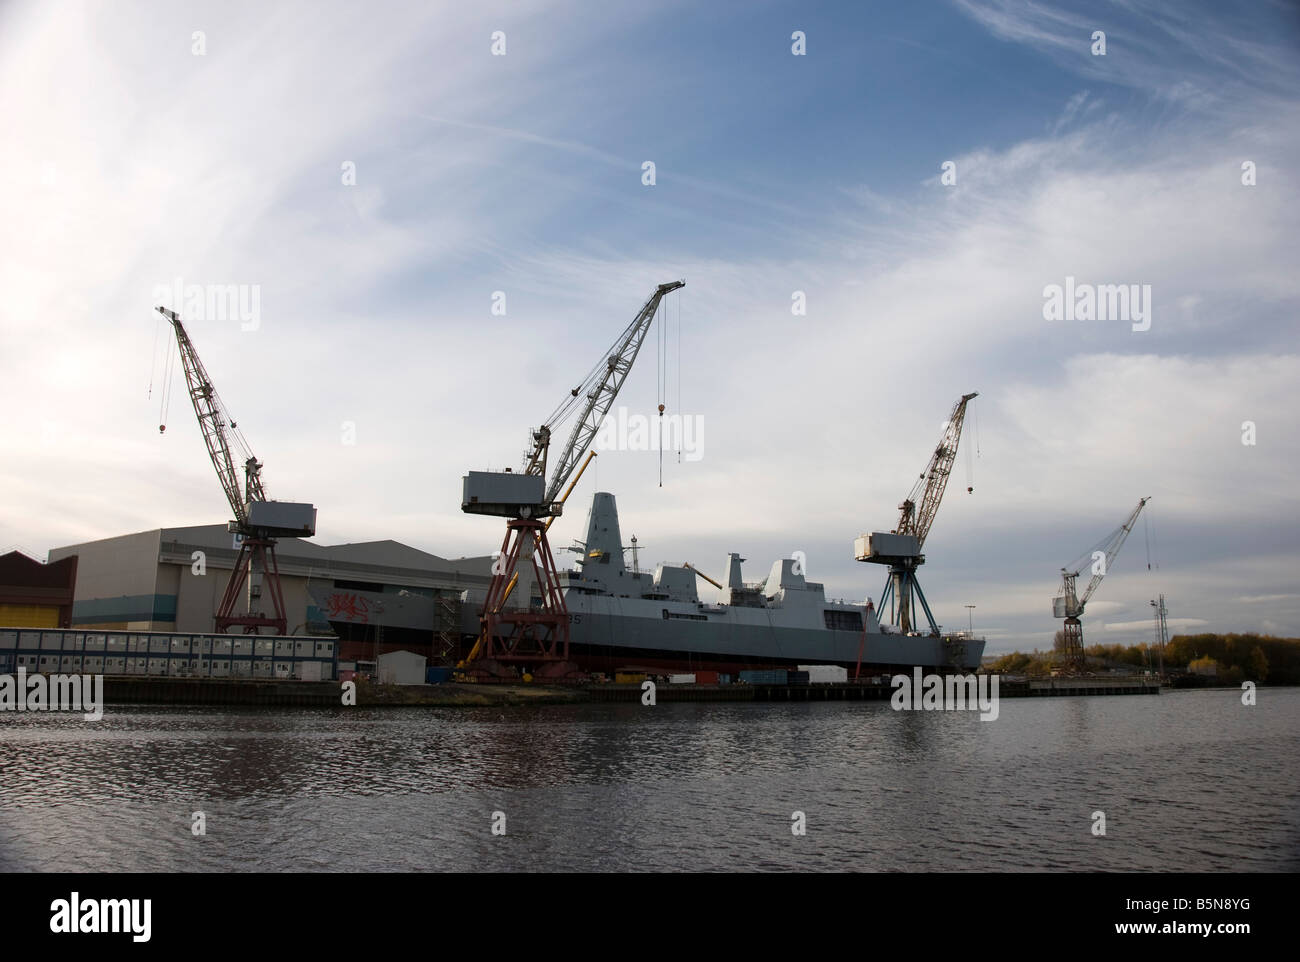 Royal Navy Type 45 Air Defence Destroyer HMS Dragon on the Slips at BAE Systems Govan Shipyard Clydeside River Clyde Glasgow Stock Photo